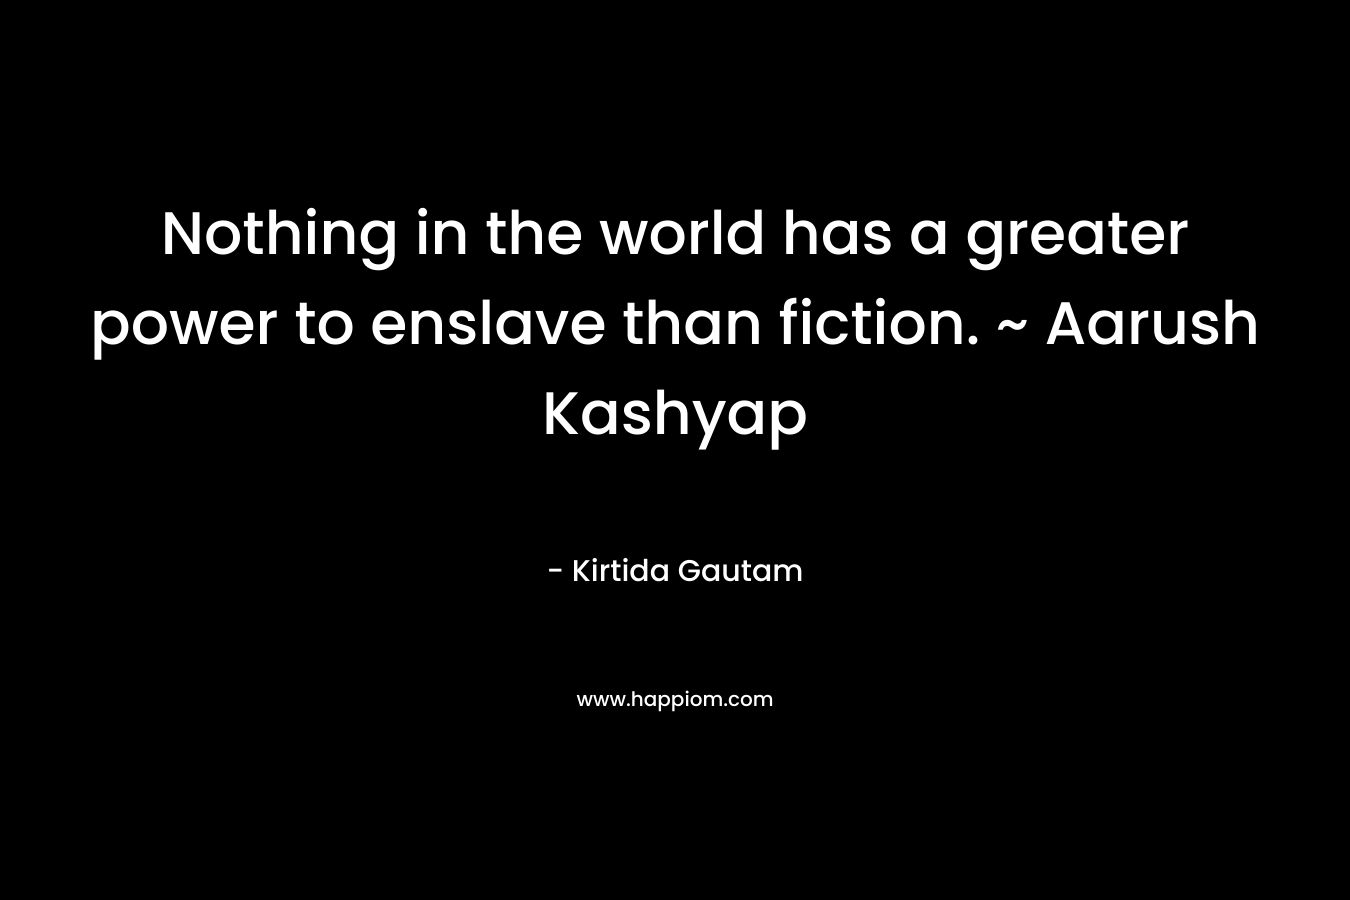 Nothing in the world has a greater power to enslave than fiction. ~ Aarush Kashyap